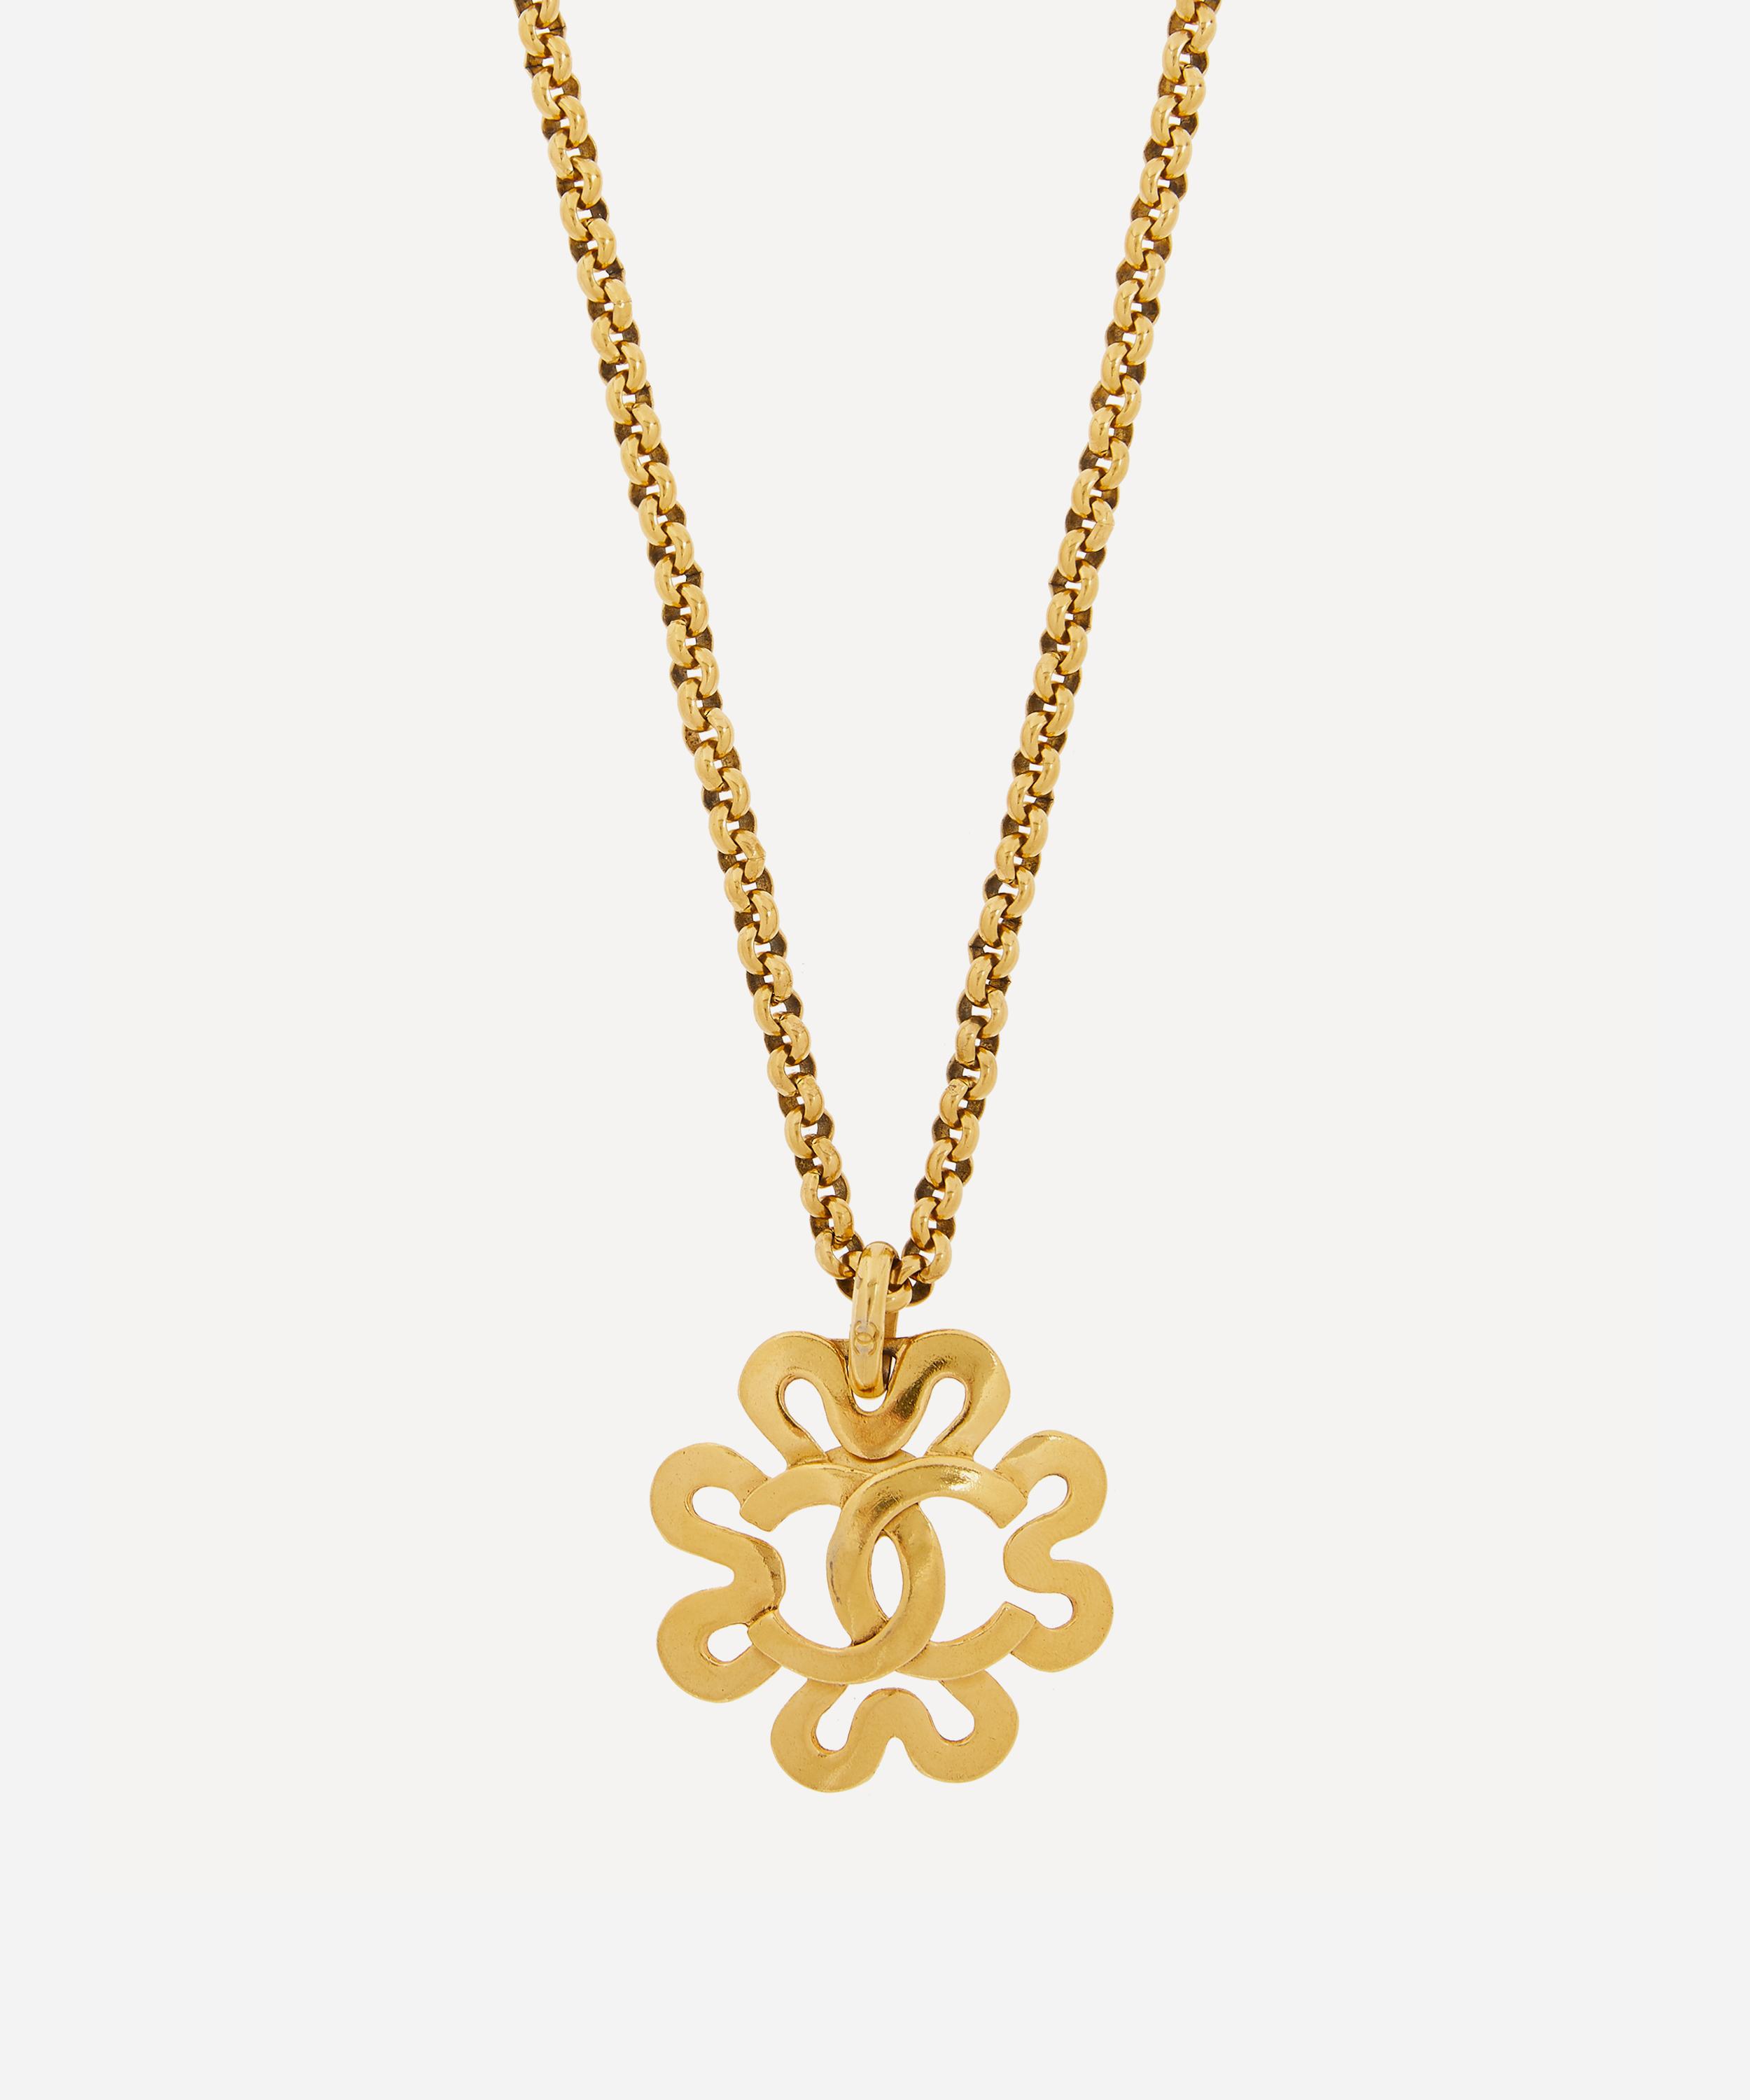 Designer Vintage 1990s Chanel Gilt Logo And Daisy Pendant Necklace In Gold